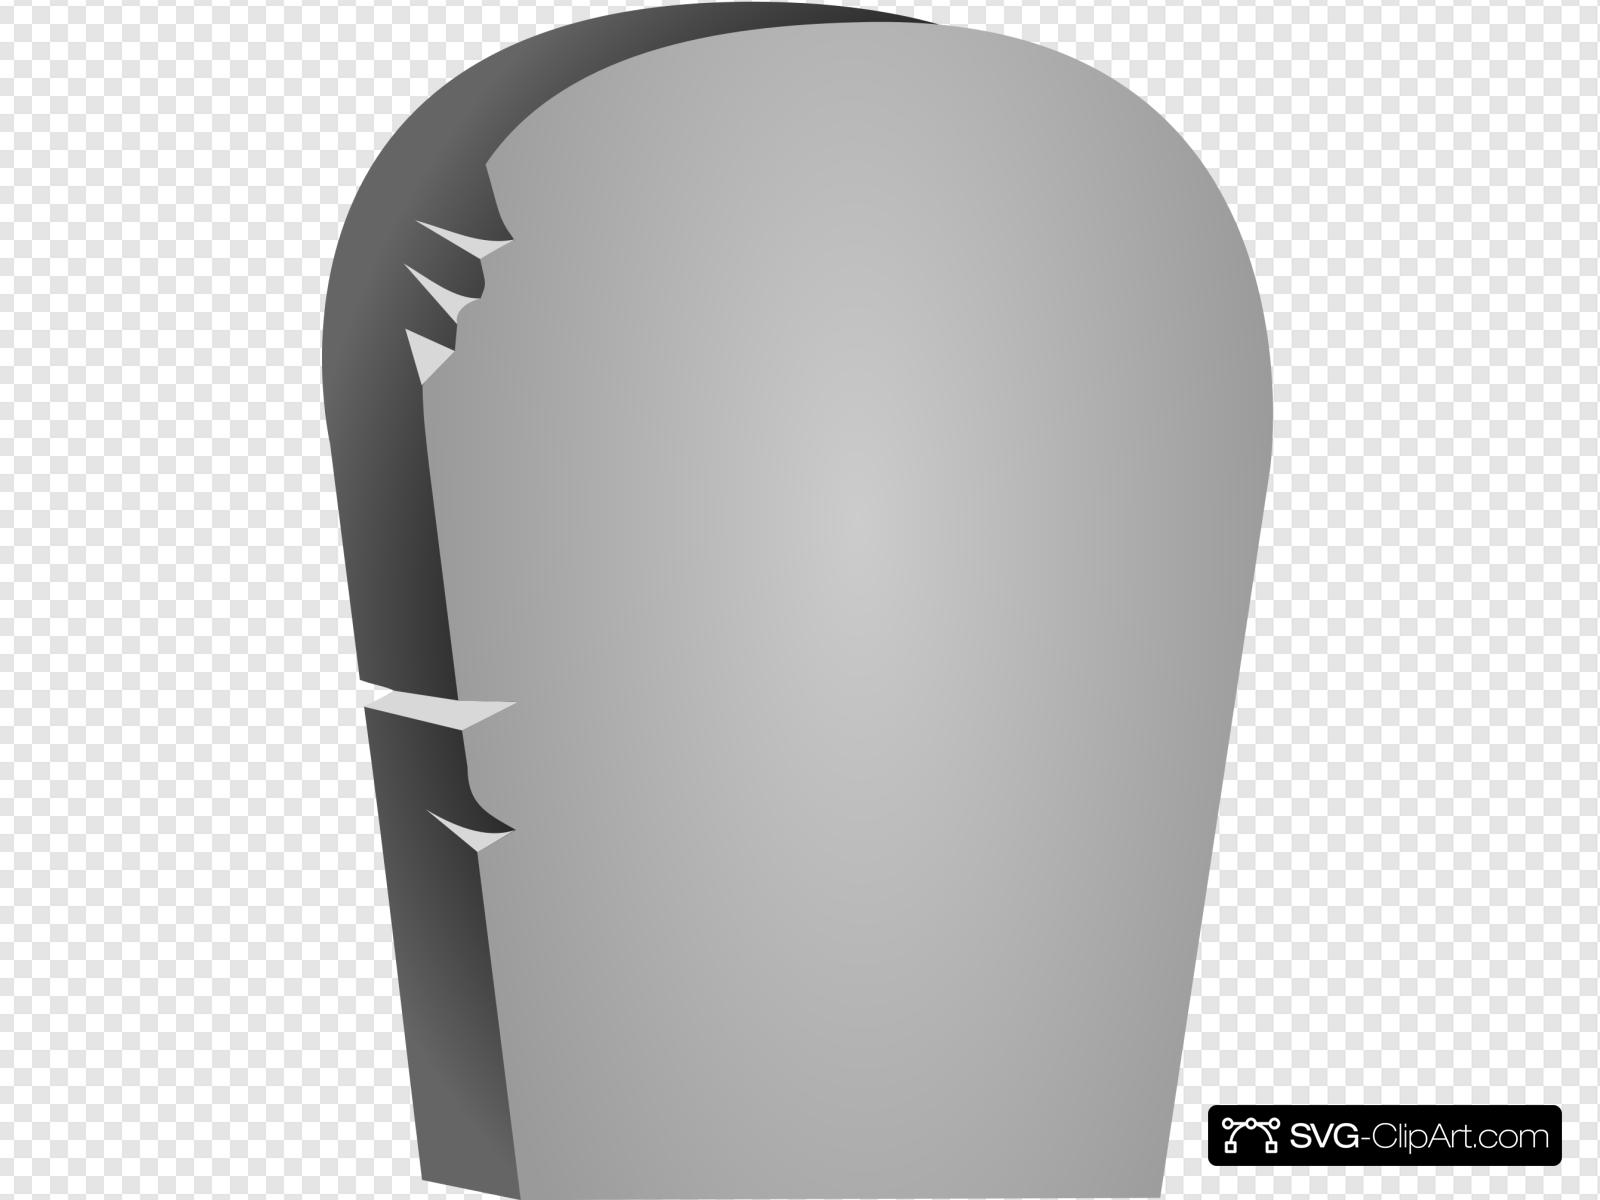 Rounded Tombstone Clip art, Icon and SVG